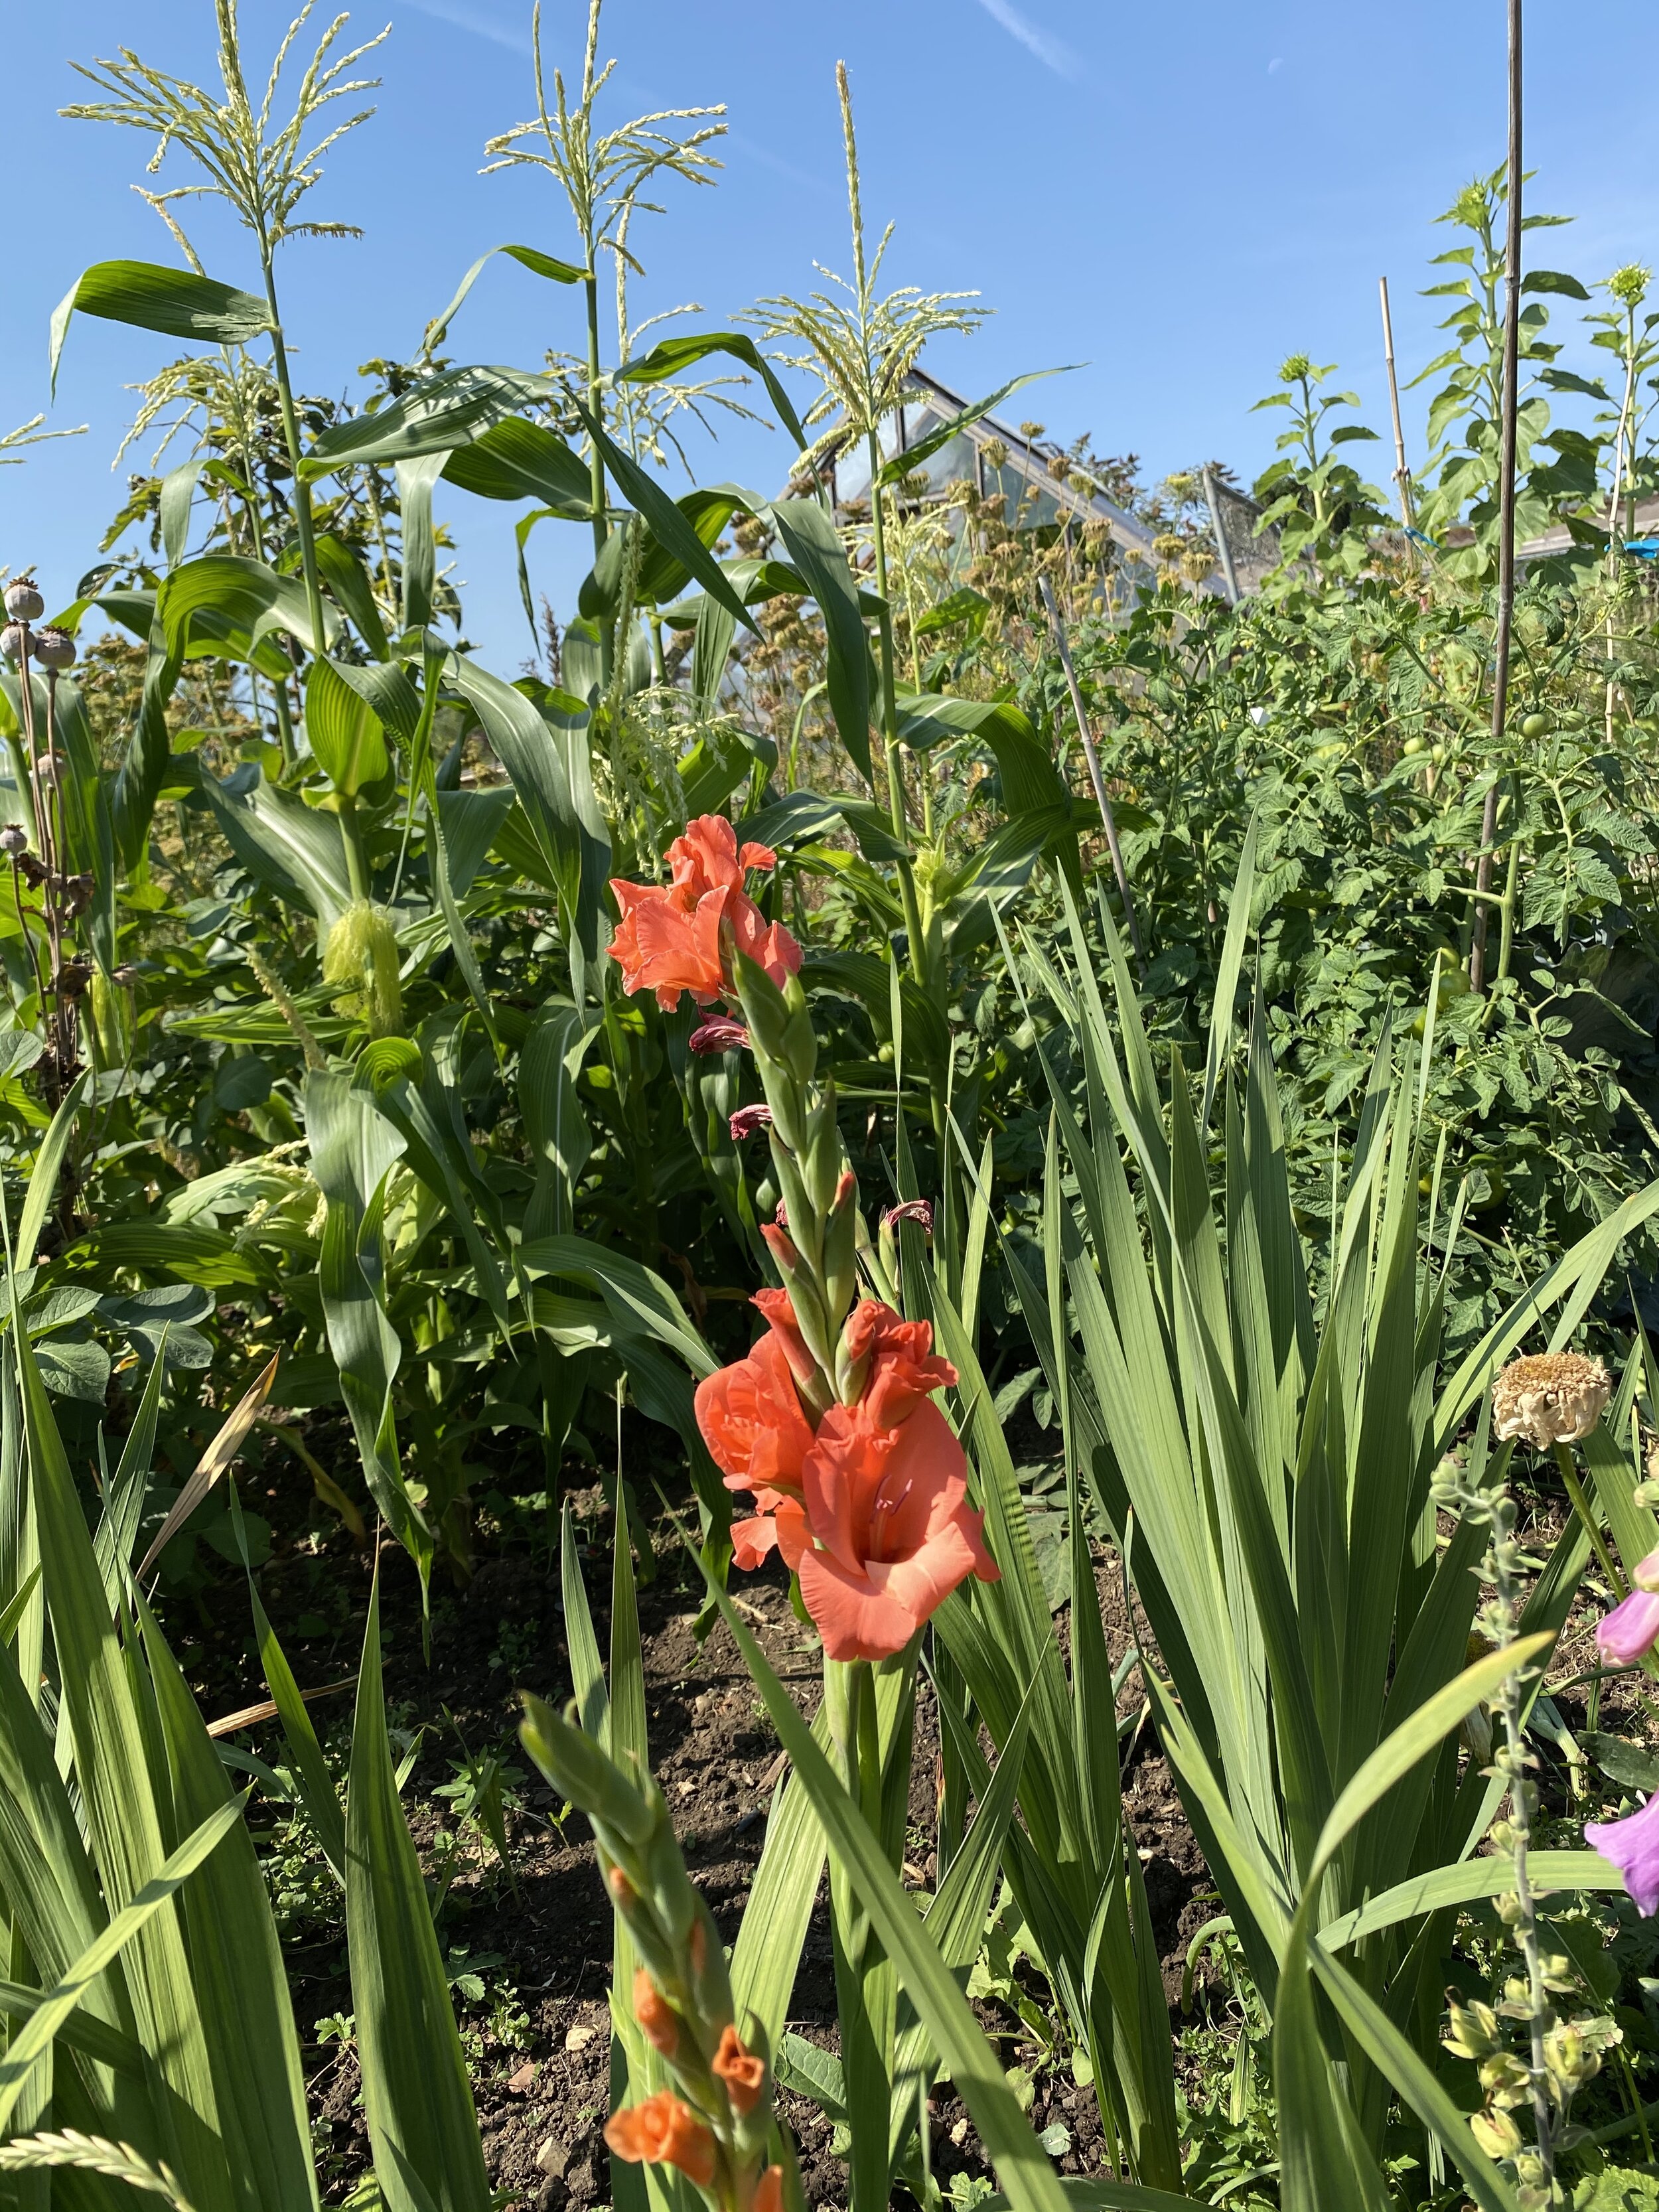 Gladiolus flowers opening to a backdrop of maize plant tassles on my plot